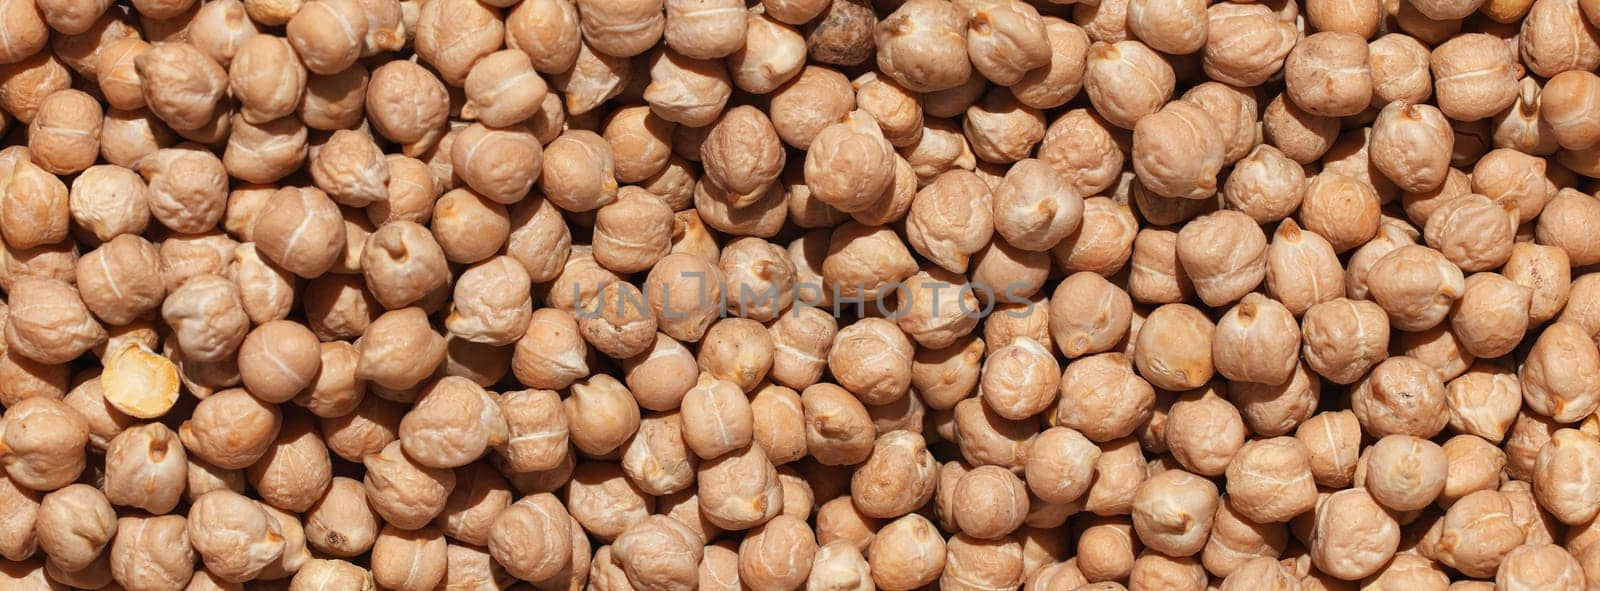 Raw chickpea beans. Top view on chickpea seeds. Food background from a texture of raw chickpeas close-up, top view. Uncooked chickpea. healthy food banner. by EvgeniyQW